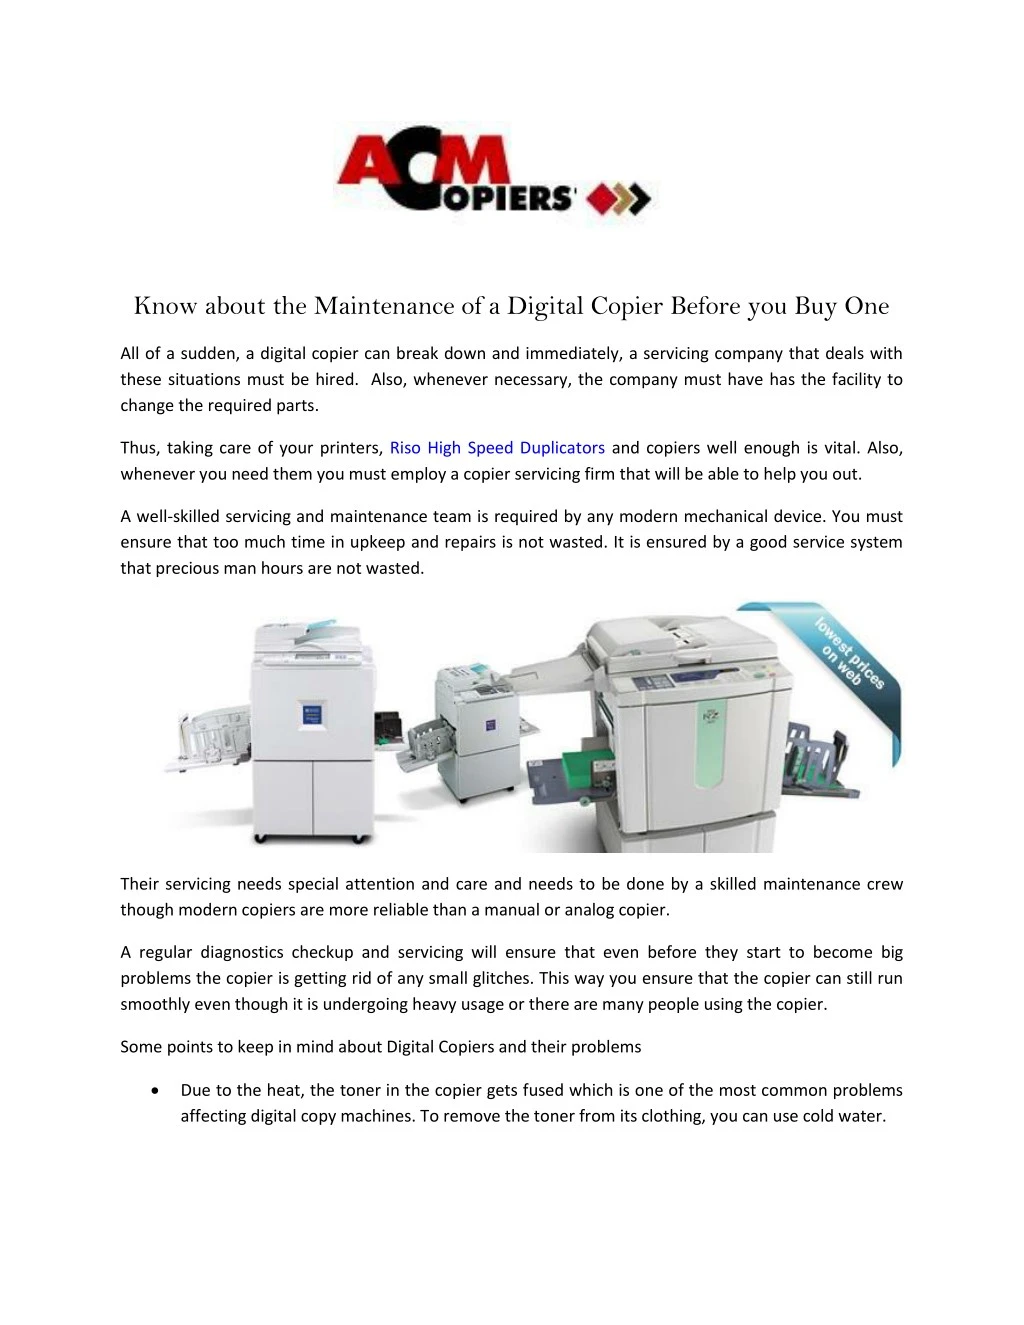 know about the maintenance of a digital copier